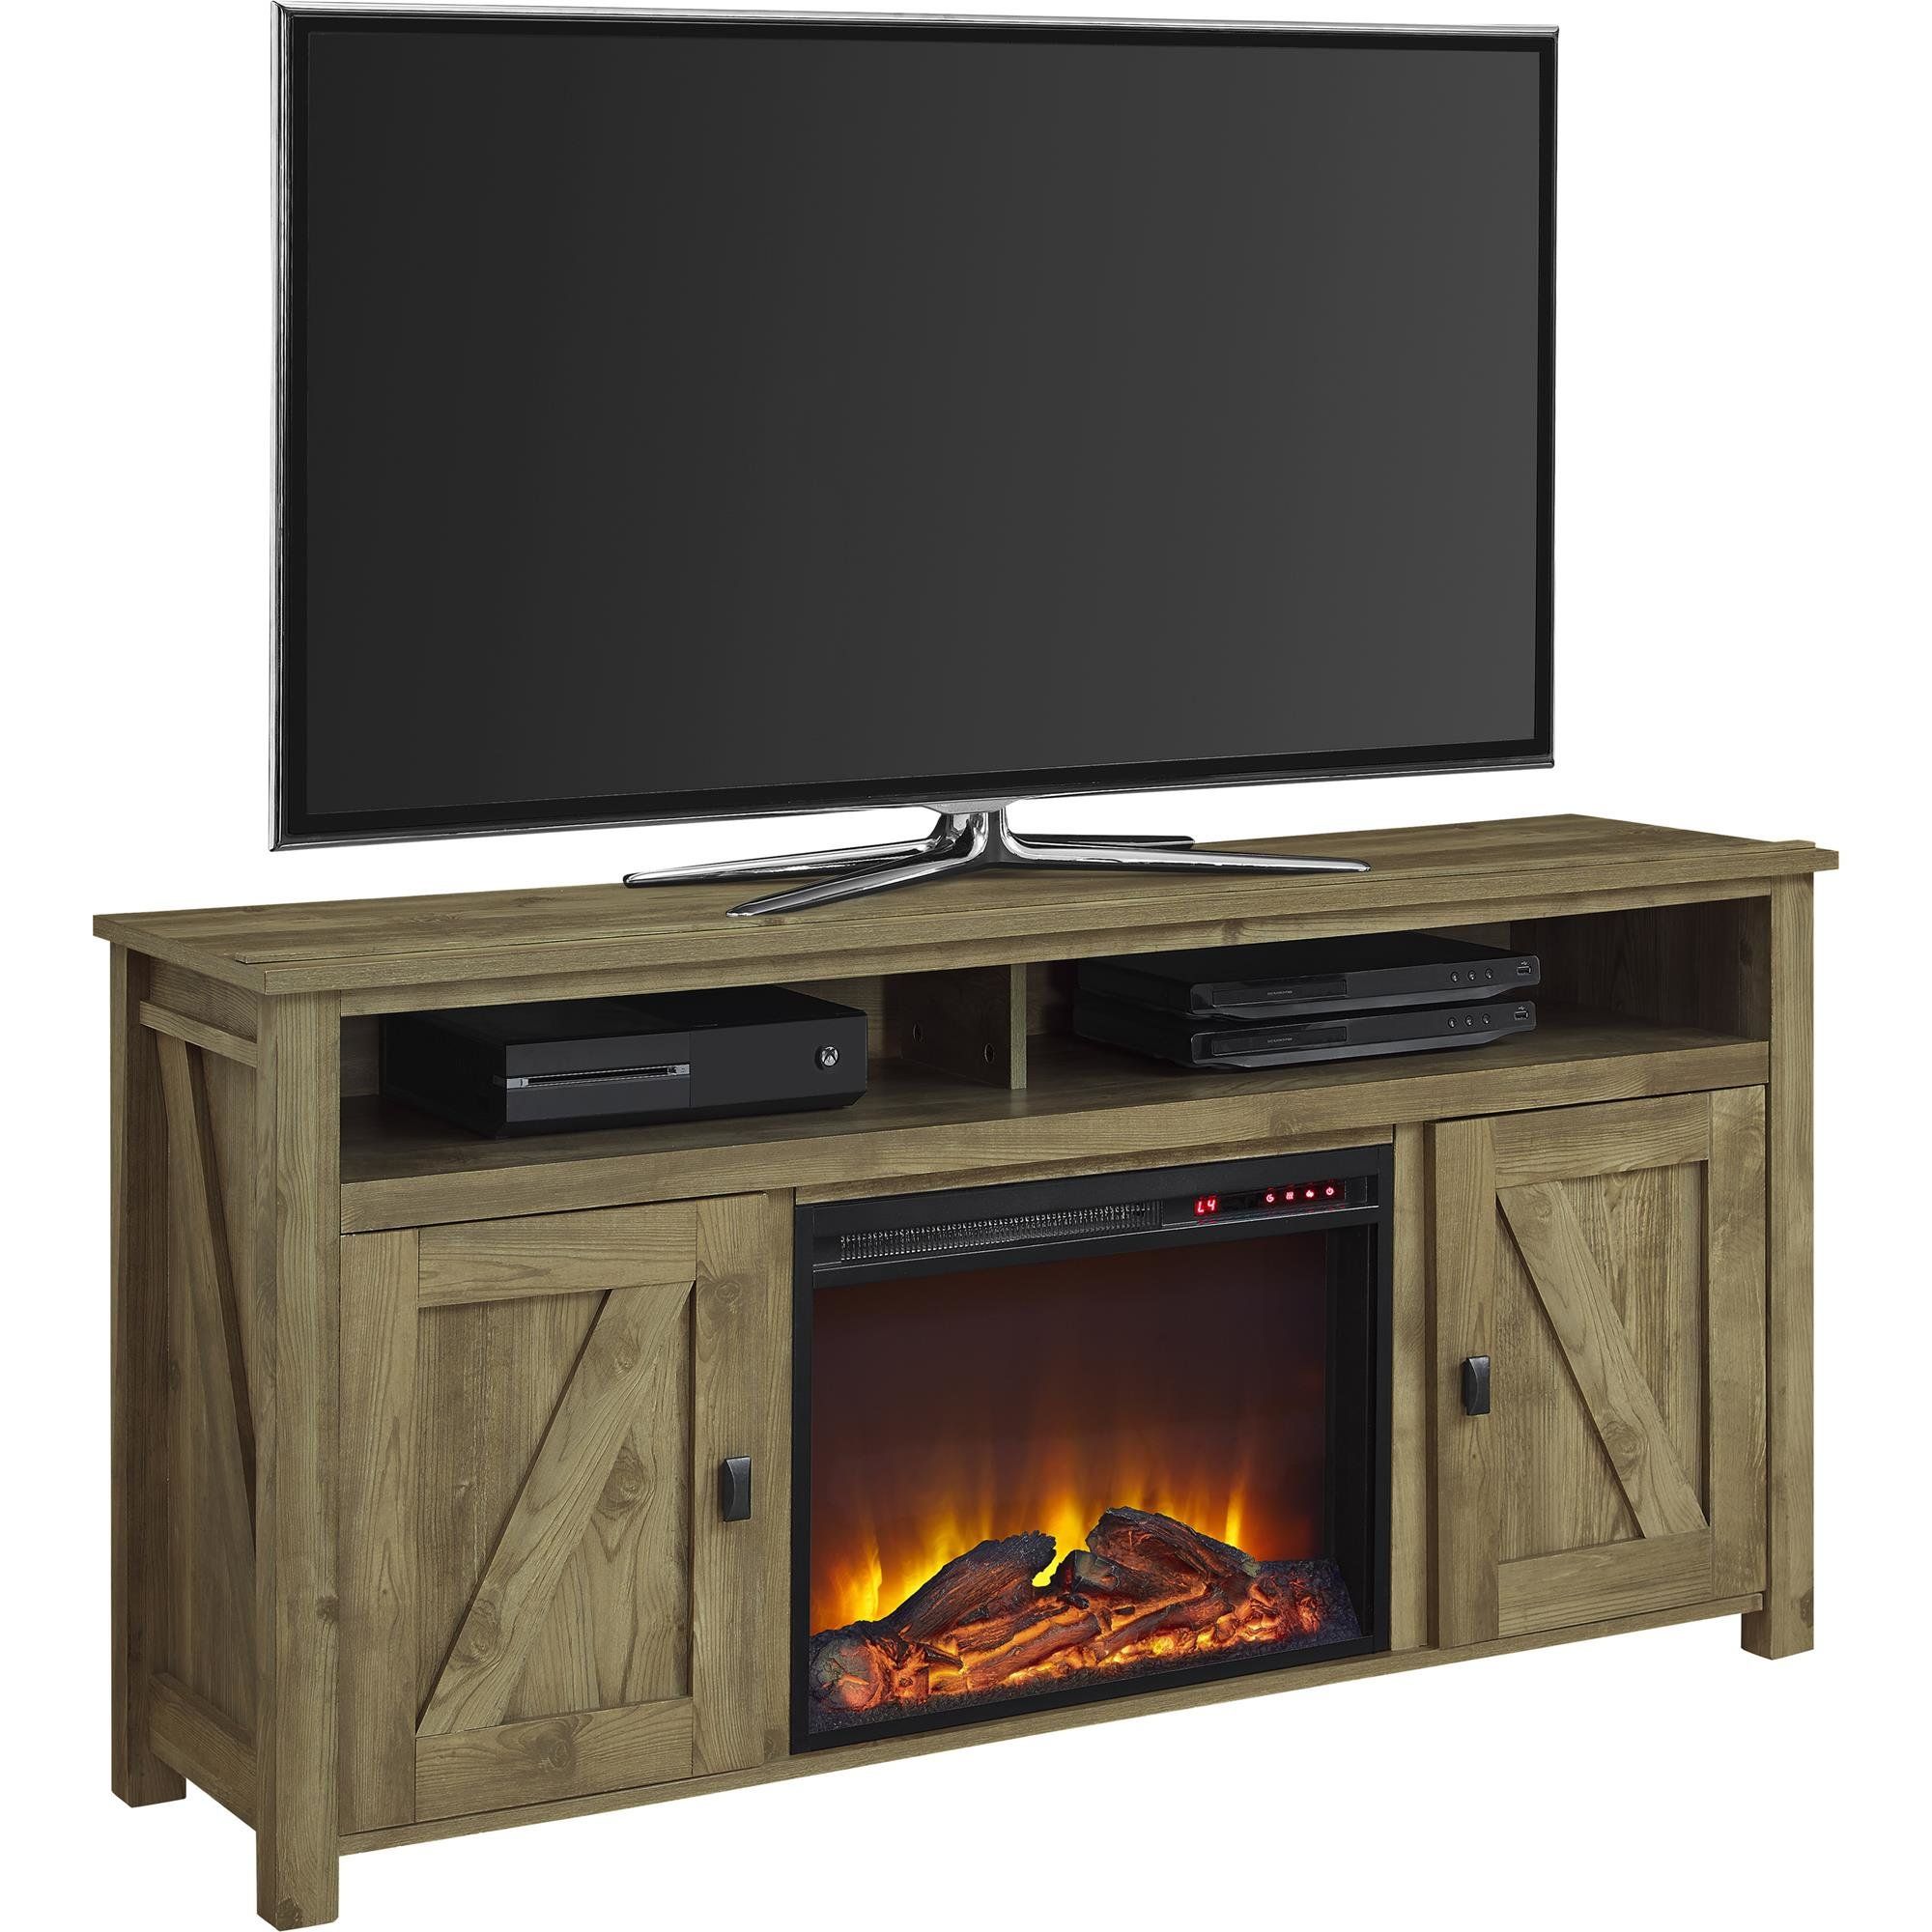 Whittier Tv Stand For Tvs Up To 60" With Fireplace & Reviews | Joss For Dixon White 65 Inch Tv Stands (View 12 of 30)